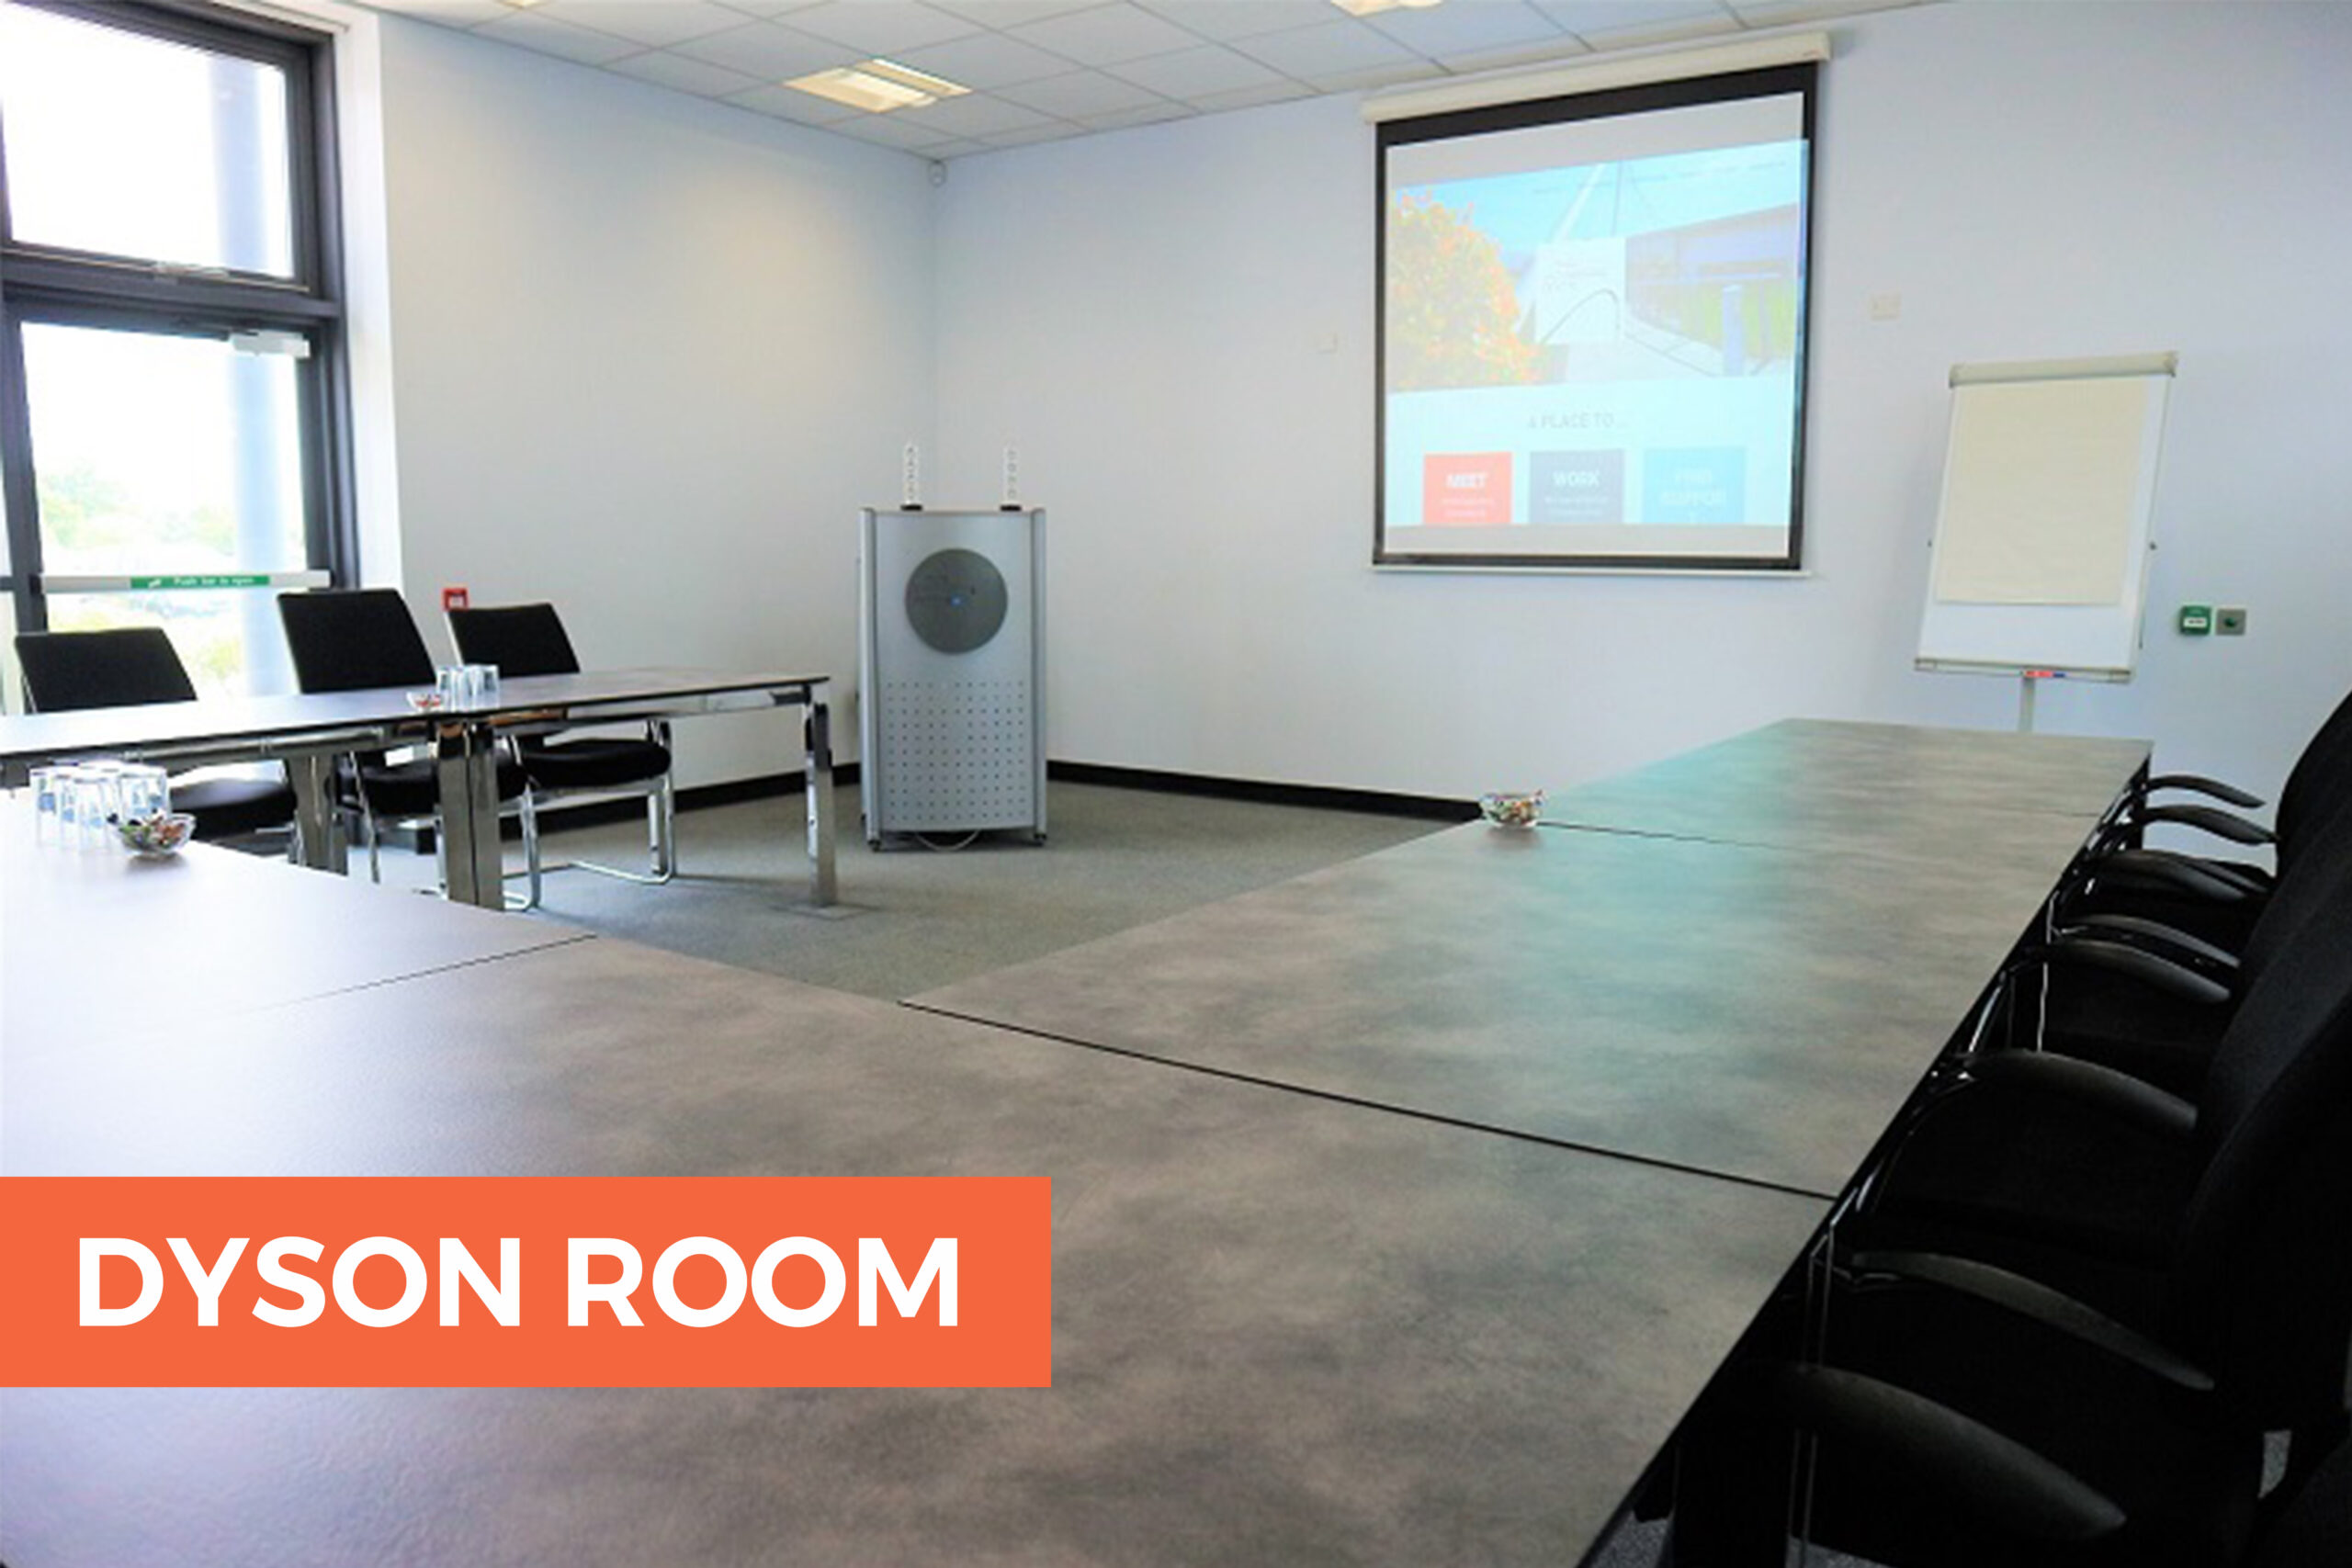 The Dyson Room, a Conference space in Norfolk based at the Hethel Engineering Centre